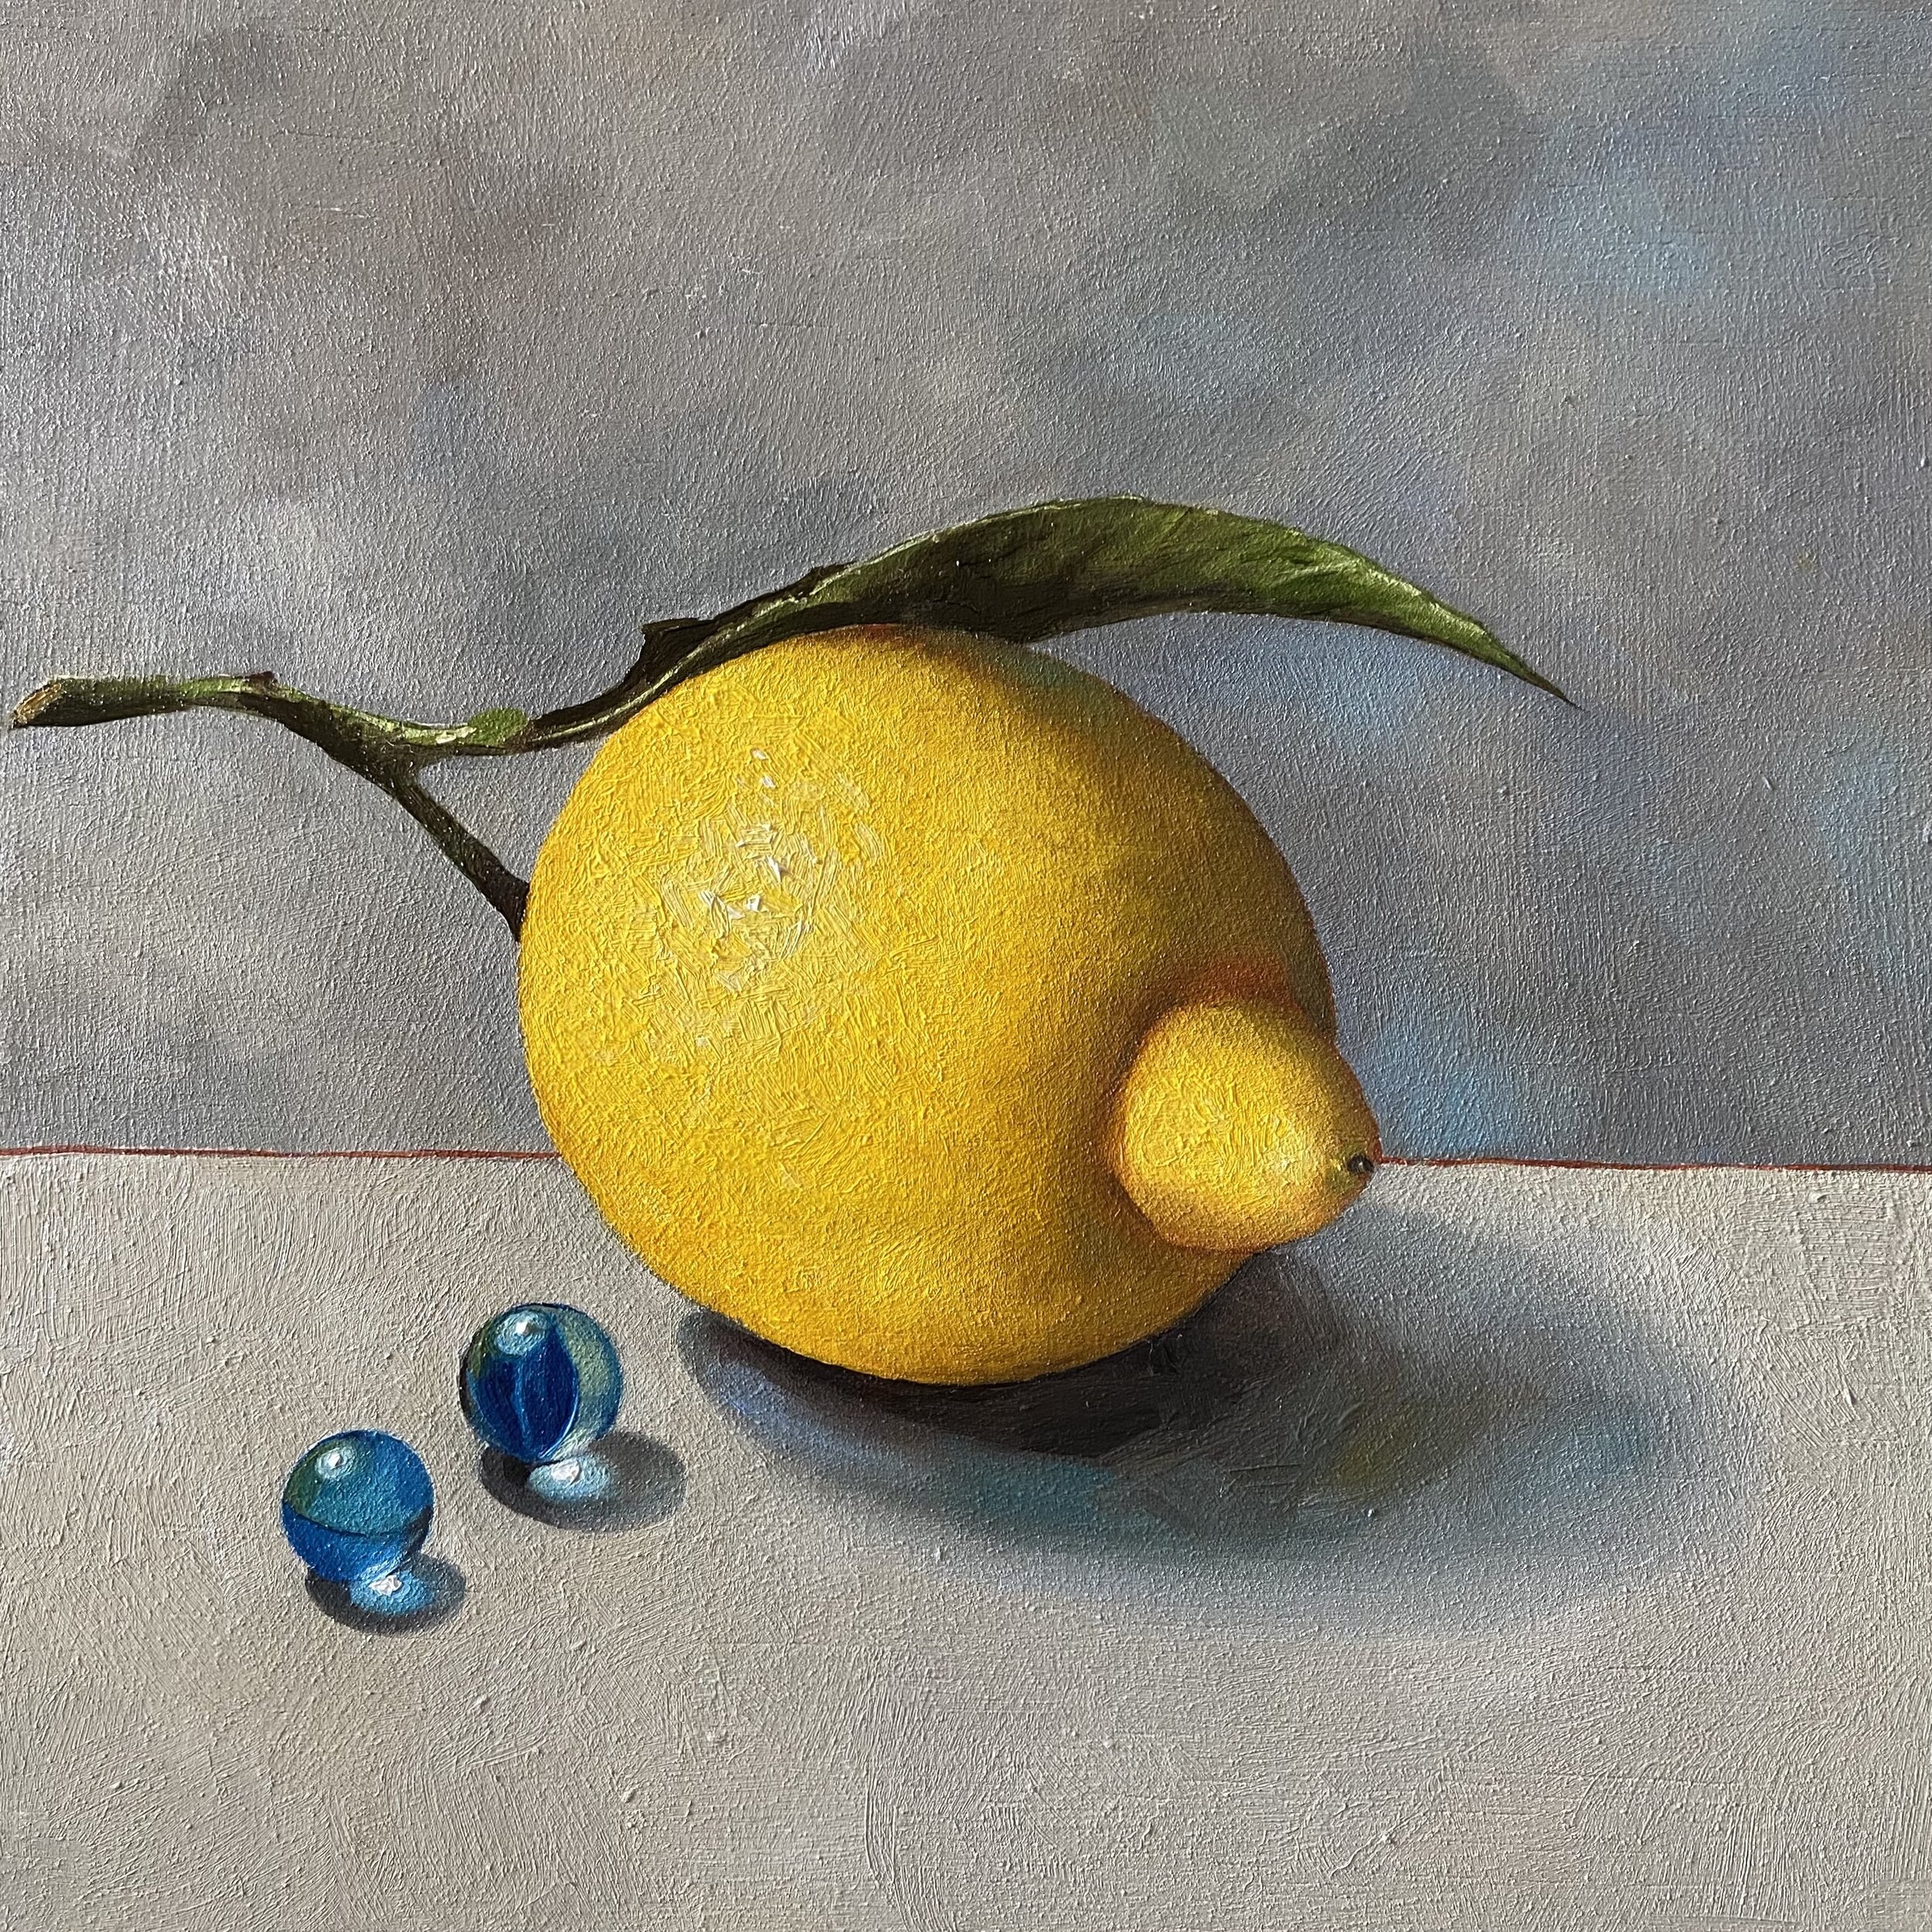 Leafy lemon with blue marbles